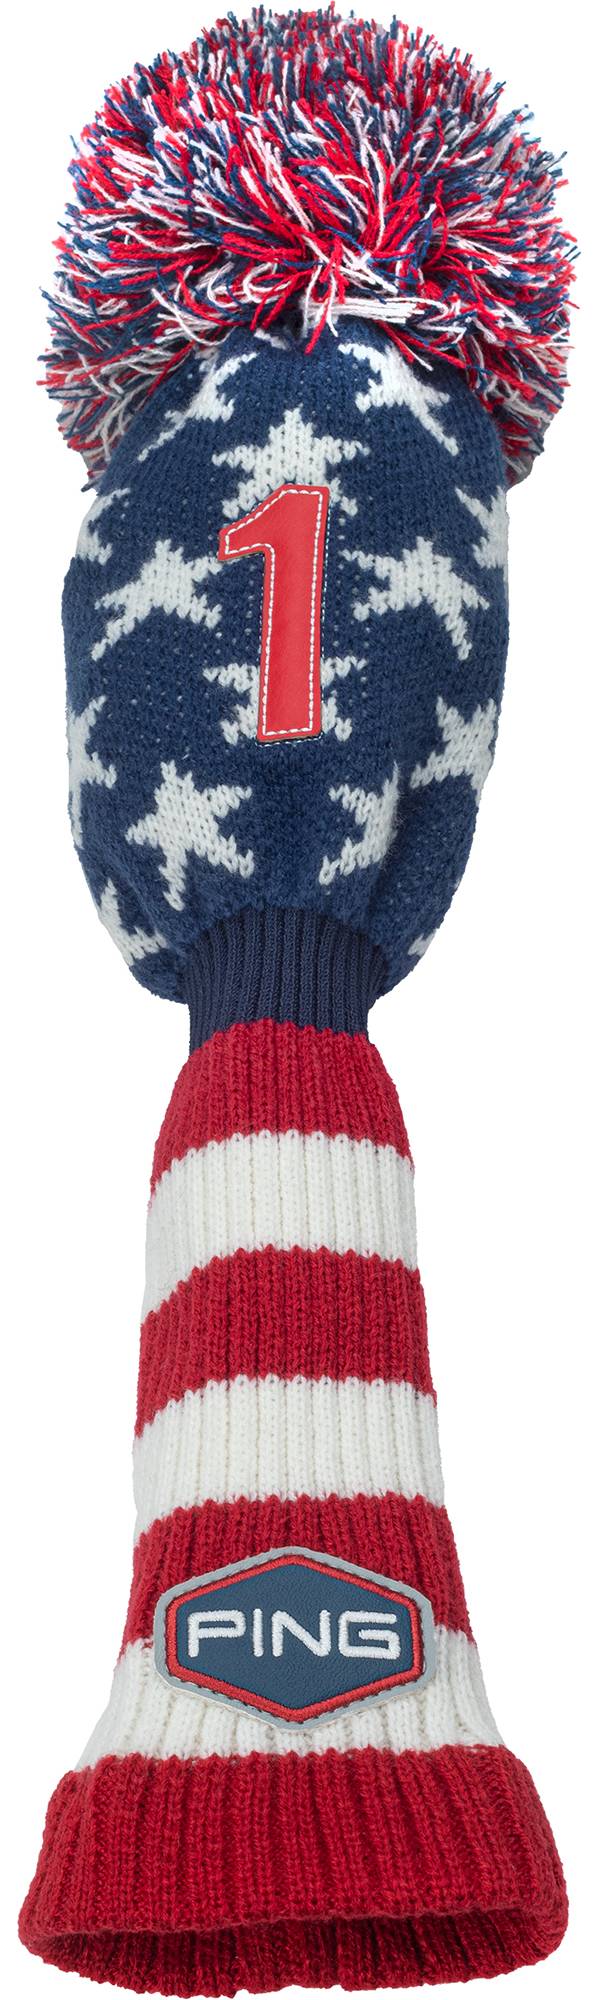 PING Liberty Knit Driver Headcover product image